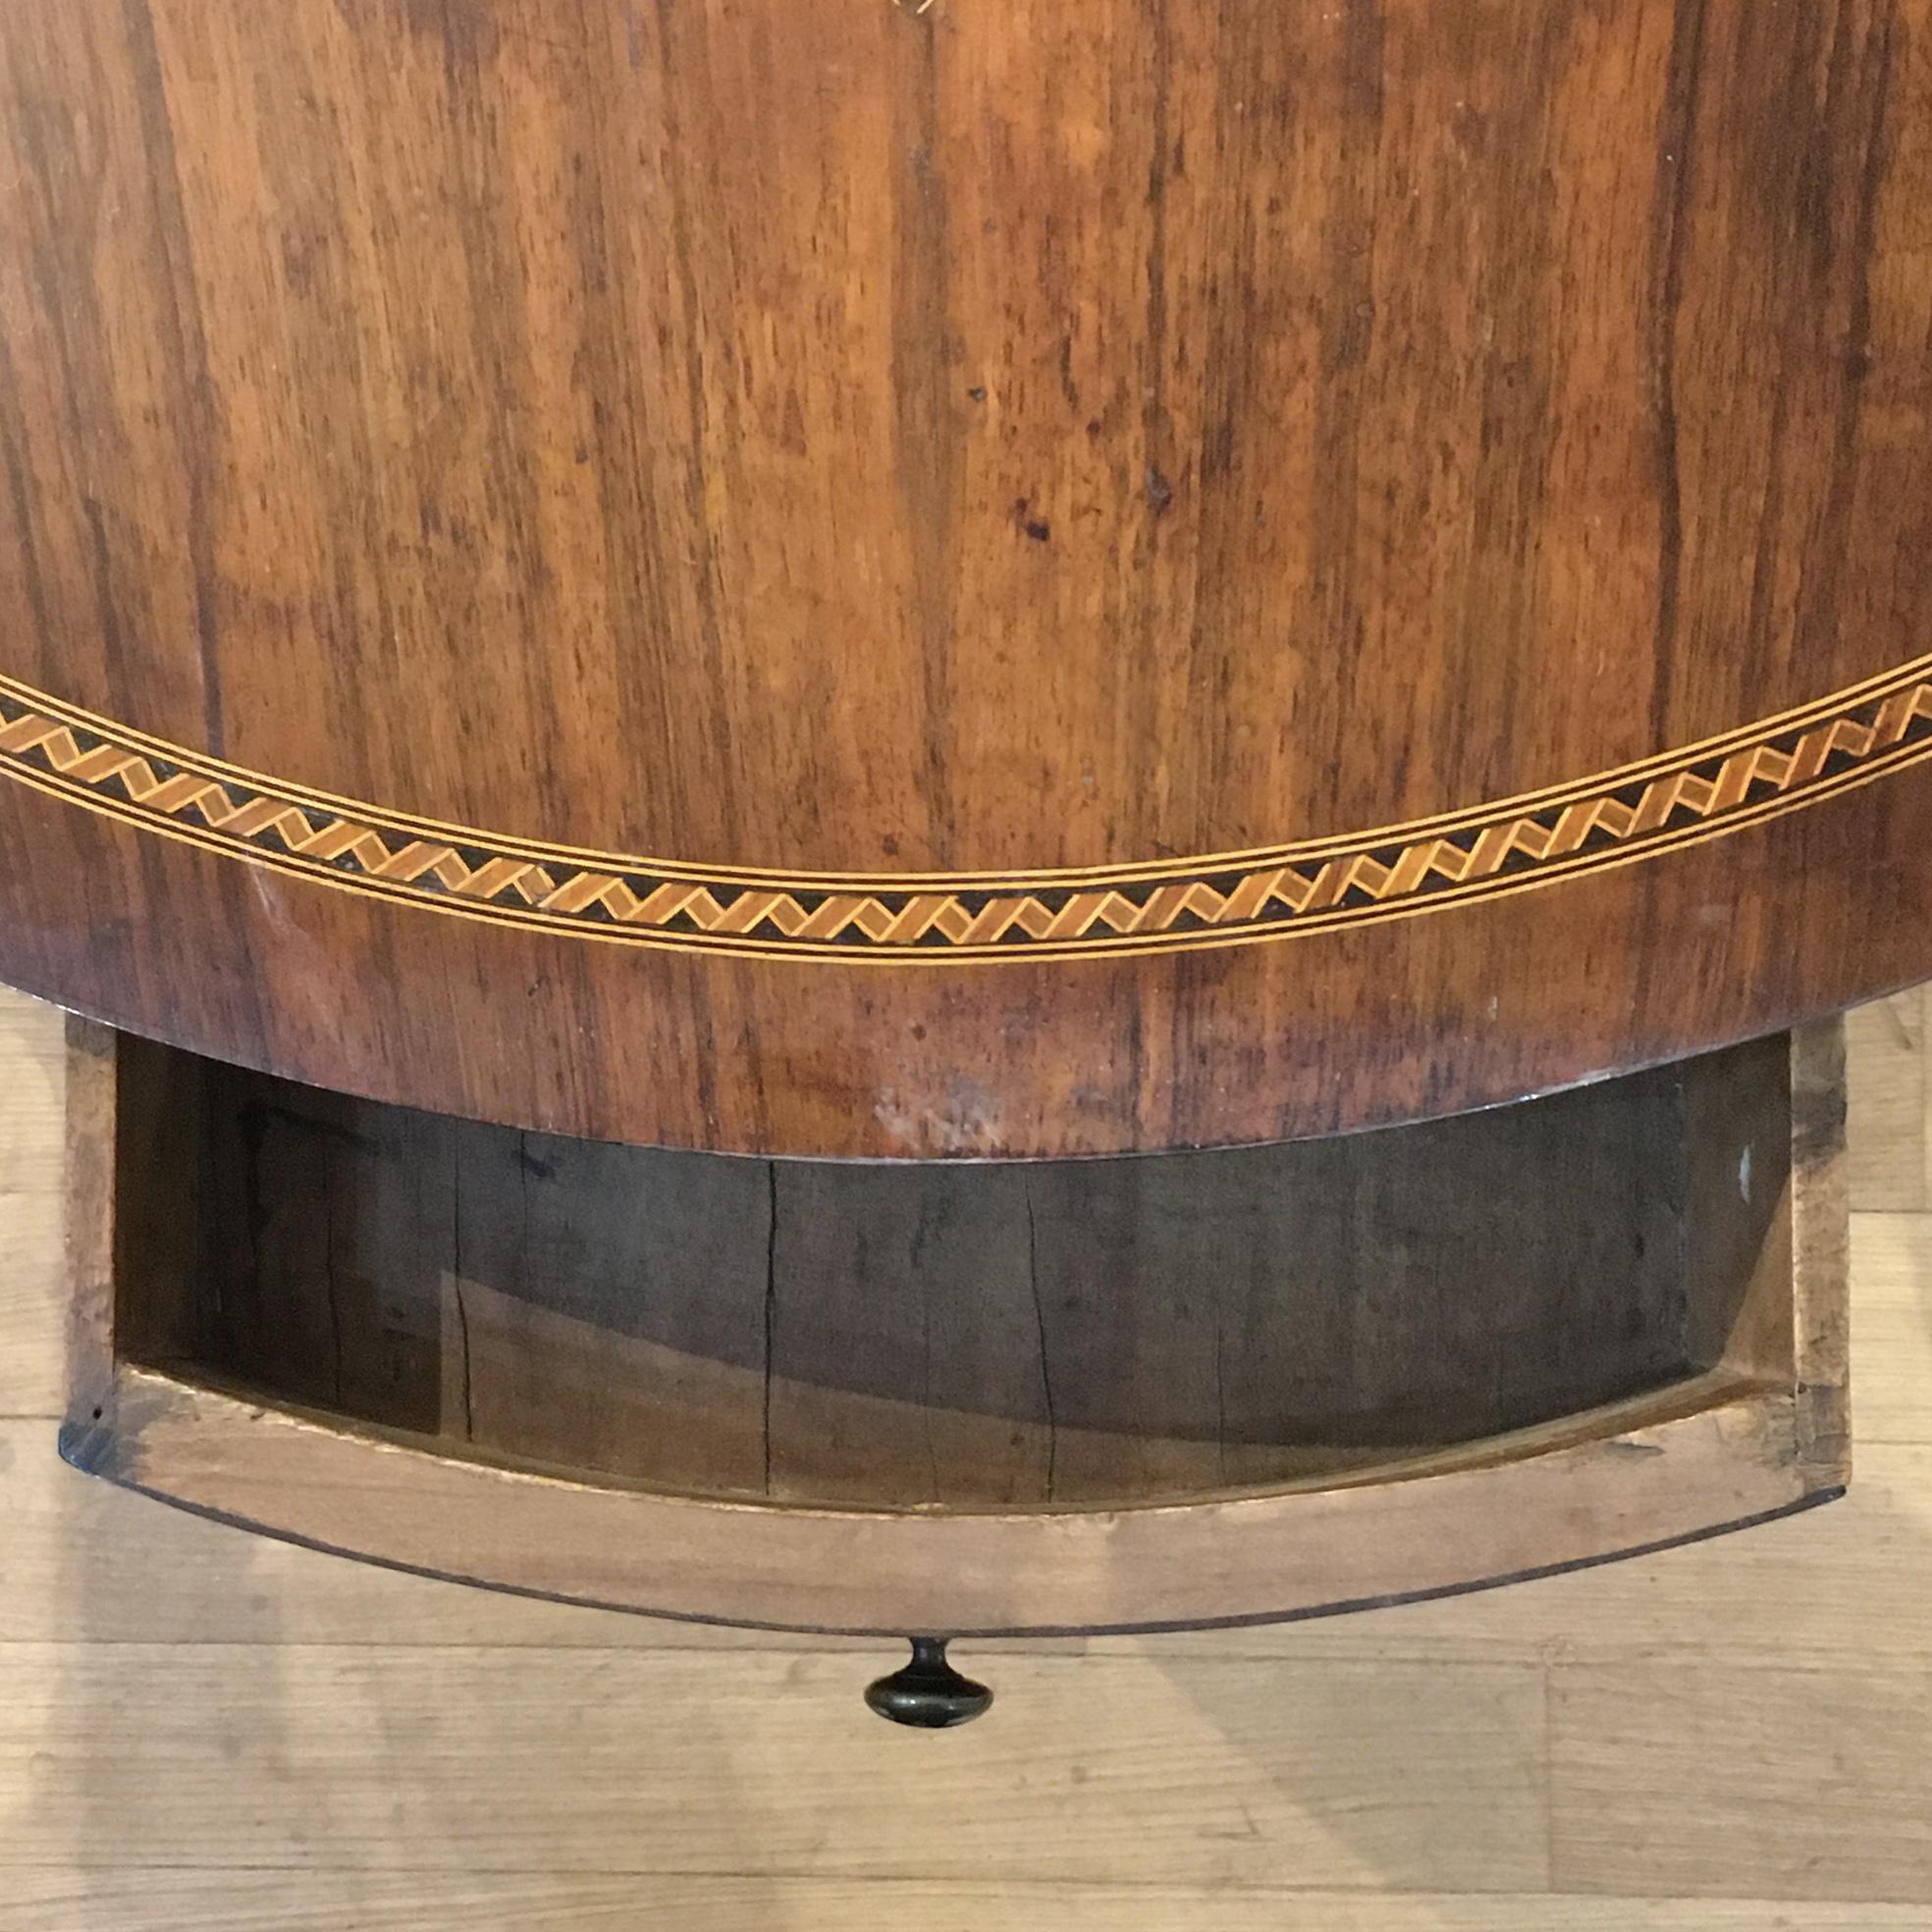 EARLY 19th CENTURY TUSCAN DIRECTORIO TABLE IN WALNUT AND FRUIT WOOD In Good Condition For Sale In Firenze, FI